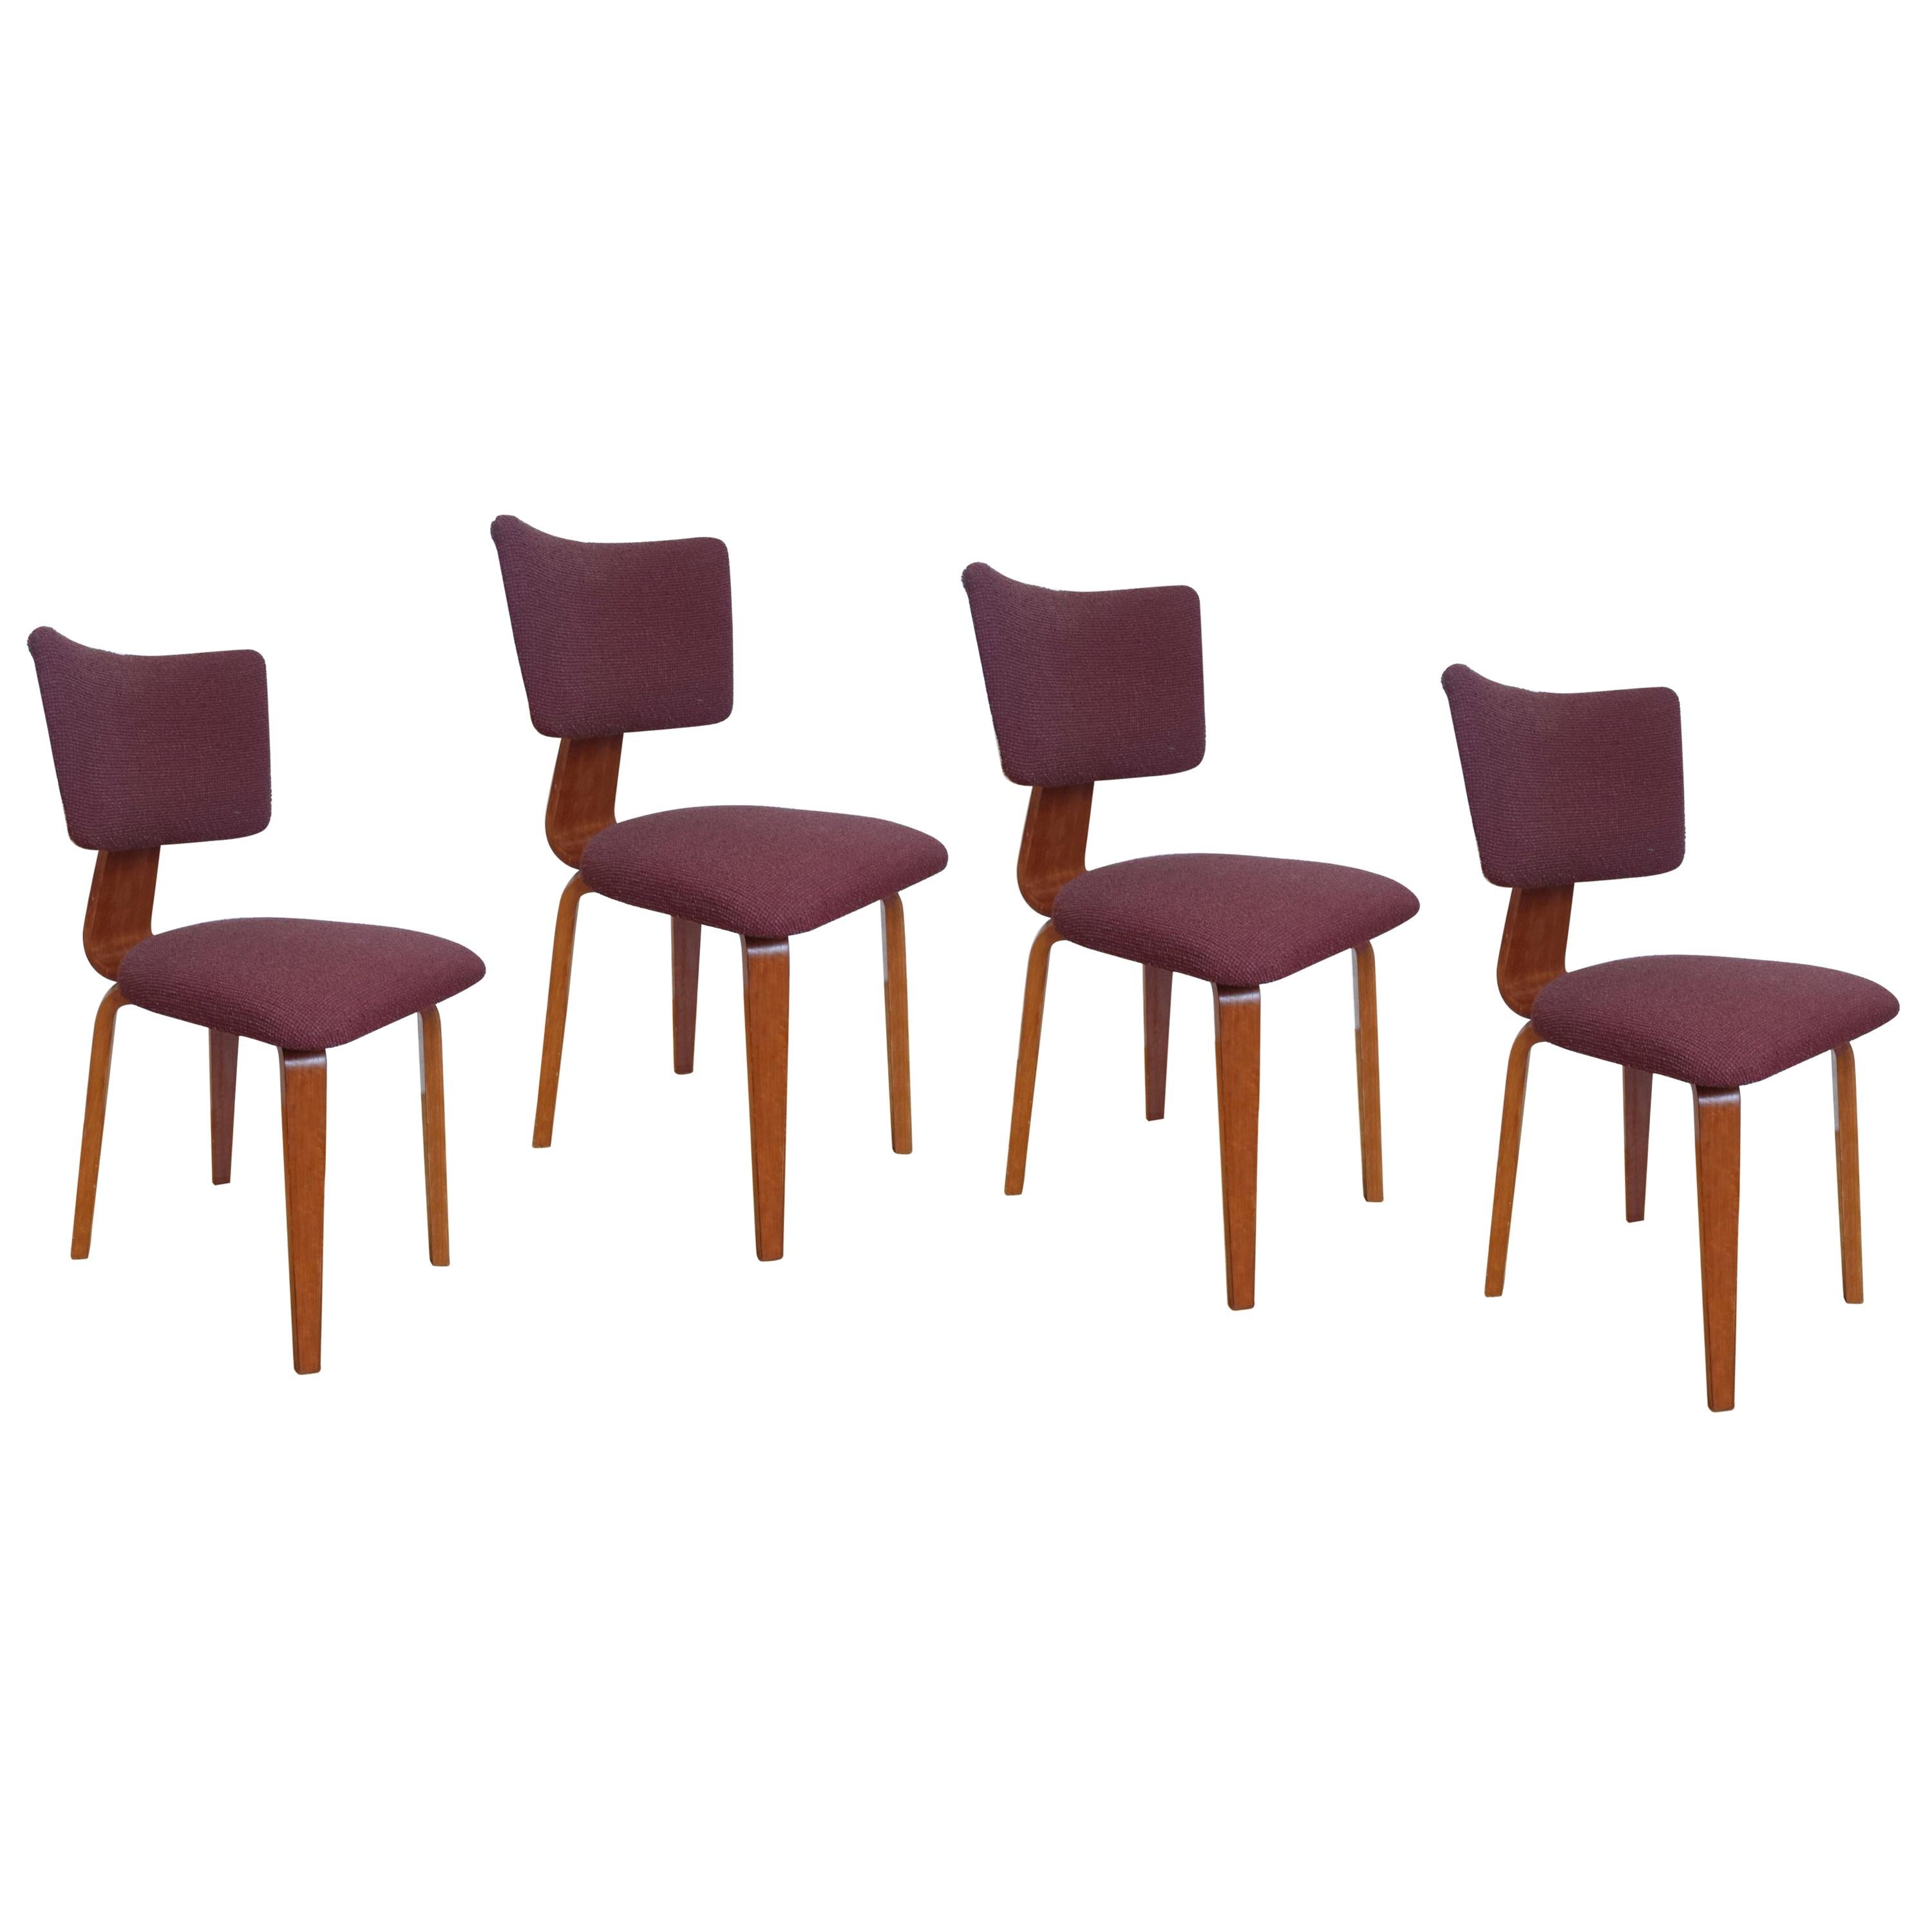 Four Blond Wood Dining Chairs by Dutch Cor Alons 1950s For Sale